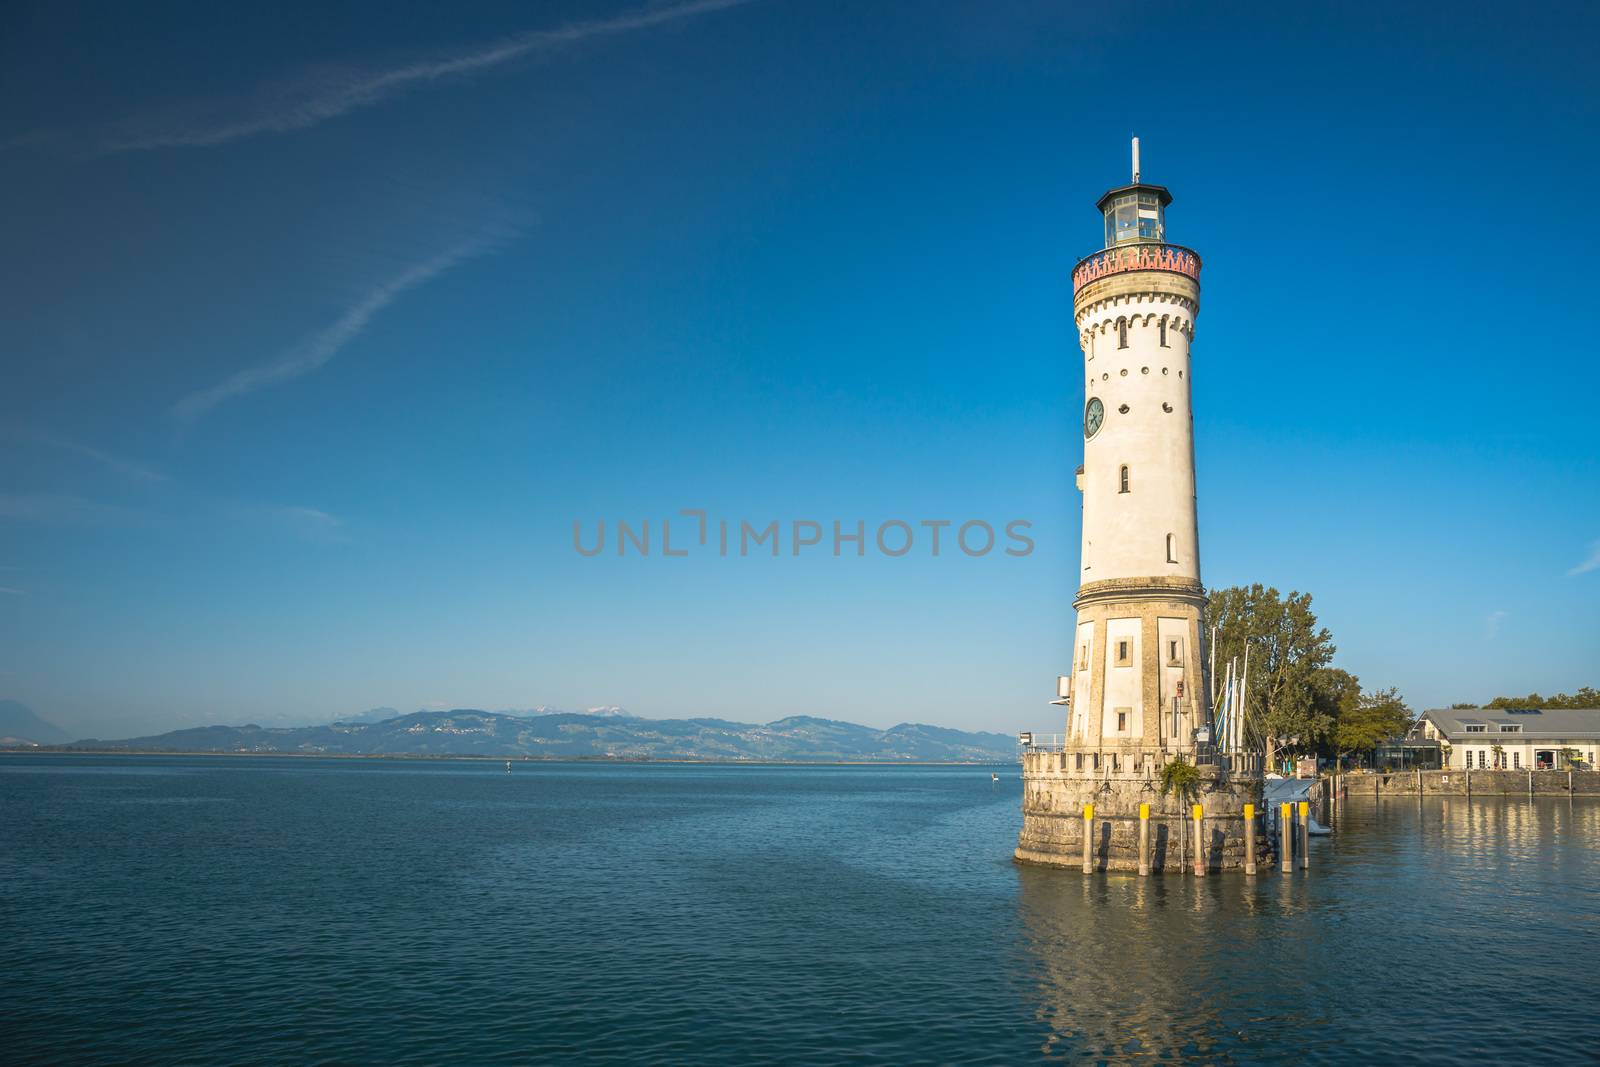 Lighthouse in the harbor of Lindau, Bavaria. A city in Germany, on an island in the middle of Lake Constance. Alps in the background